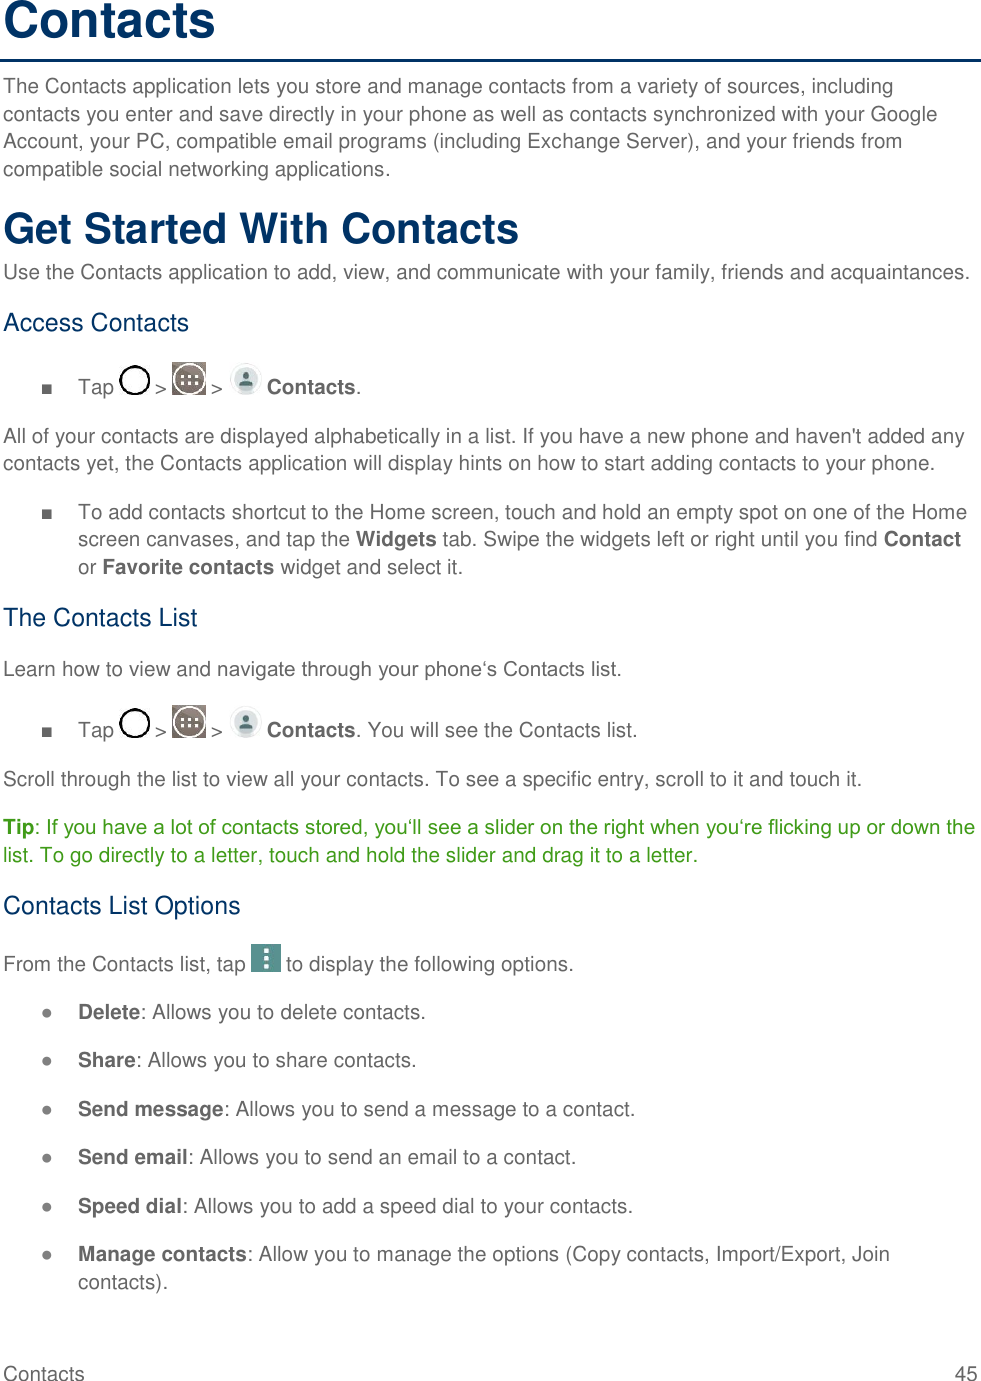 Contacts  45 Contacts The Contacts application lets you store and manage contacts from a variety of sources, including contacts you enter and save directly in your phone as well as contacts synchronized with your Google Account, your PC, compatible email programs (including Exchange Server), and your friends from compatible social networking applications. Get Started With Contacts Use the Contacts application to add, view, and communicate with your family, friends and acquaintances. Access Contacts ■  Tap   &gt;   &gt;   Contacts. All of your contacts are displayed alphabetically in a list. If you have a new phone and haven&apos;t added any contacts yet, the Contacts application will display hints on how to start adding contacts to your phone. ■  To add contacts shortcut to the Home screen, touch and hold an empty spot on one of the Home screen canvases, and tap the Widgets tab. Swipe the widgets left or right until you find Contact or Favorite contacts widget and select it. The Contacts List Learn how to view and navigate through your phone‗s Contacts list. ■  Tap   &gt;   &gt;   Contacts. You will see the Contacts list. Scroll through the list to view all your contacts. To see a specific entry, scroll to it and touch it. Tip: If you have a lot of contacts stored, you‗ll see a slider on the right when you‗re flicking up or down the list. To go directly to a letter, touch and hold the slider and drag it to a letter. Contacts List Options From the Contacts list, tap   to display the following options. ● Delete: Allows you to delete contacts. ● Share: Allows you to share contacts. ● Send message: Allows you to send a message to a contact. ● Send email: Allows you to send an email to a contact. ● Speed dial: Allows you to add a speed dial to your contacts. ● Manage contacts: Allow you to manage the options (Copy contacts, Import/Export, Join contacts). 